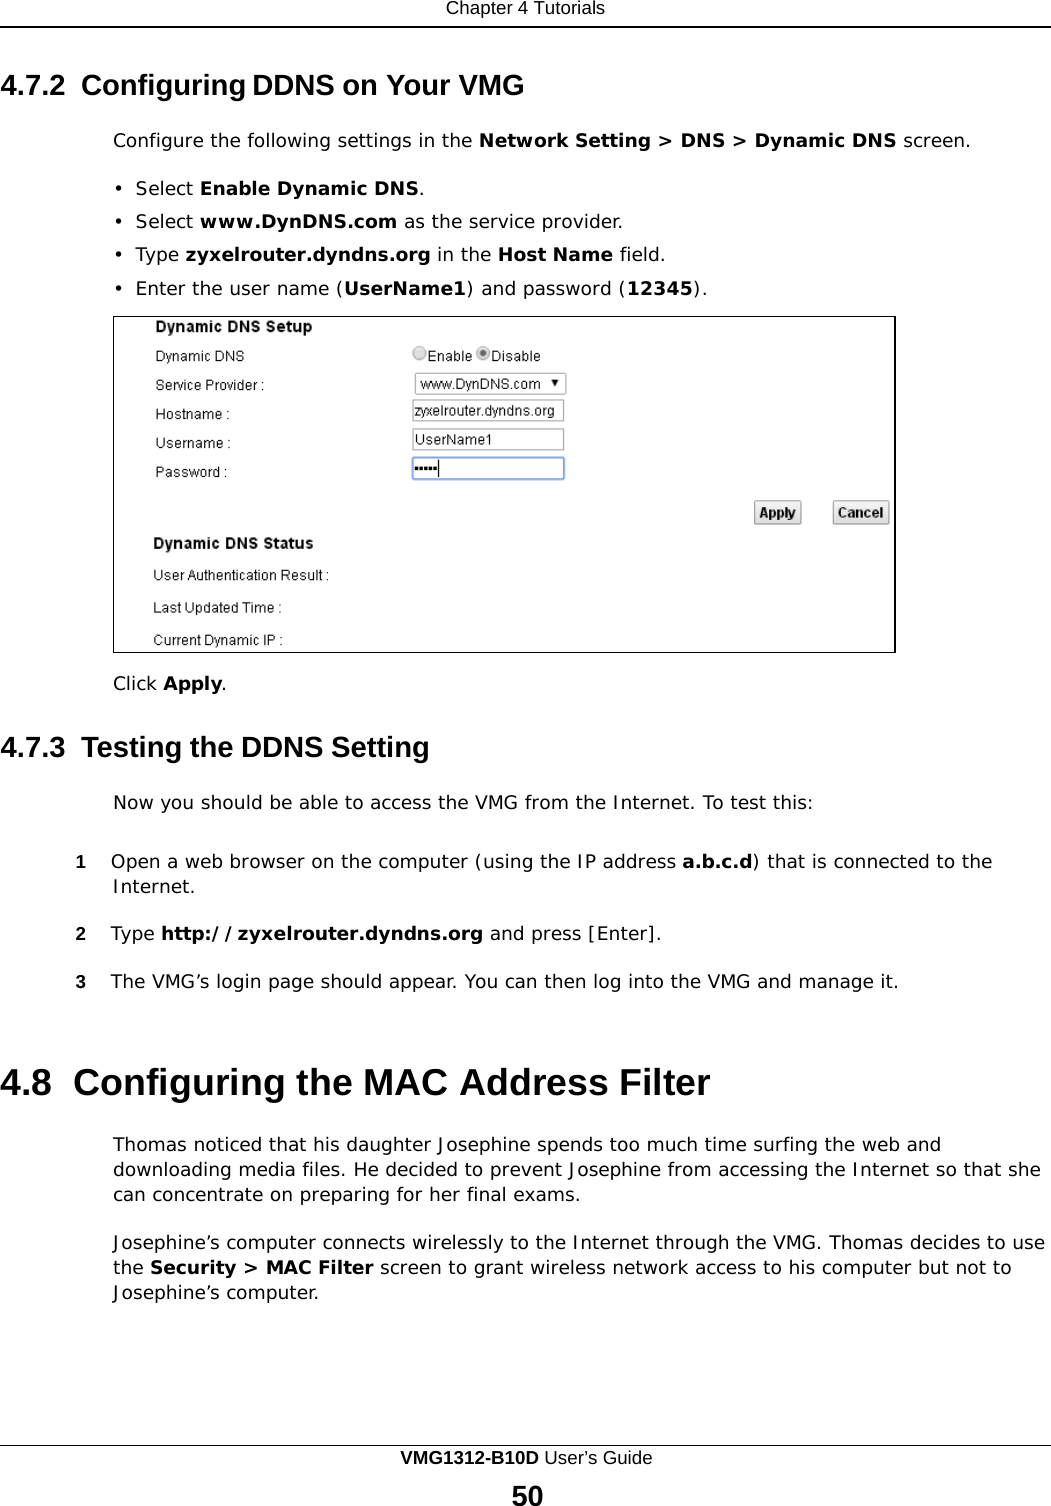 Chapter 4 Tutorials      4.7.2 Configuring DDNS on Your VMG  Configure the following settings in the Network Setting &gt; DNS &gt; Dynamic DNS screen.  •  Select Enable Dynamic DNS.  •  Select www.DynDNS.com as the service provider.  •  Type zyxelrouter.dyndns.org in the Host Name field.  •  Enter the user name (UserName1) and password (12345).                   Click Apply.   4.7.3  Testing the DDNS Setting  Now you should be able to access the VMG from the Internet. To test this:   1  Open a web browser on the computer (using the IP address a.b.c.d) that is connected to the Internet.  2  Type http://zyxelrouter.dyndns.org and press [Enter].  3  The VMG’s login page should appear. You can then log into the VMG and manage it.    4.8  Configuring the MAC Address Filter  Thomas noticed that his daughter Josephine spends too much time surfing the web and downloading media files. He decided to prevent Josephine from accessing the Internet so that she can concentrate on preparing for her final exams.  Josephine’s computer connects wirelessly to the Internet through the VMG. Thomas decides to use the Security &gt; MAC Filter screen to grant wireless network access to his computer but not to Josephine’s computer. VMG1312-B10D User’s Guide 50  